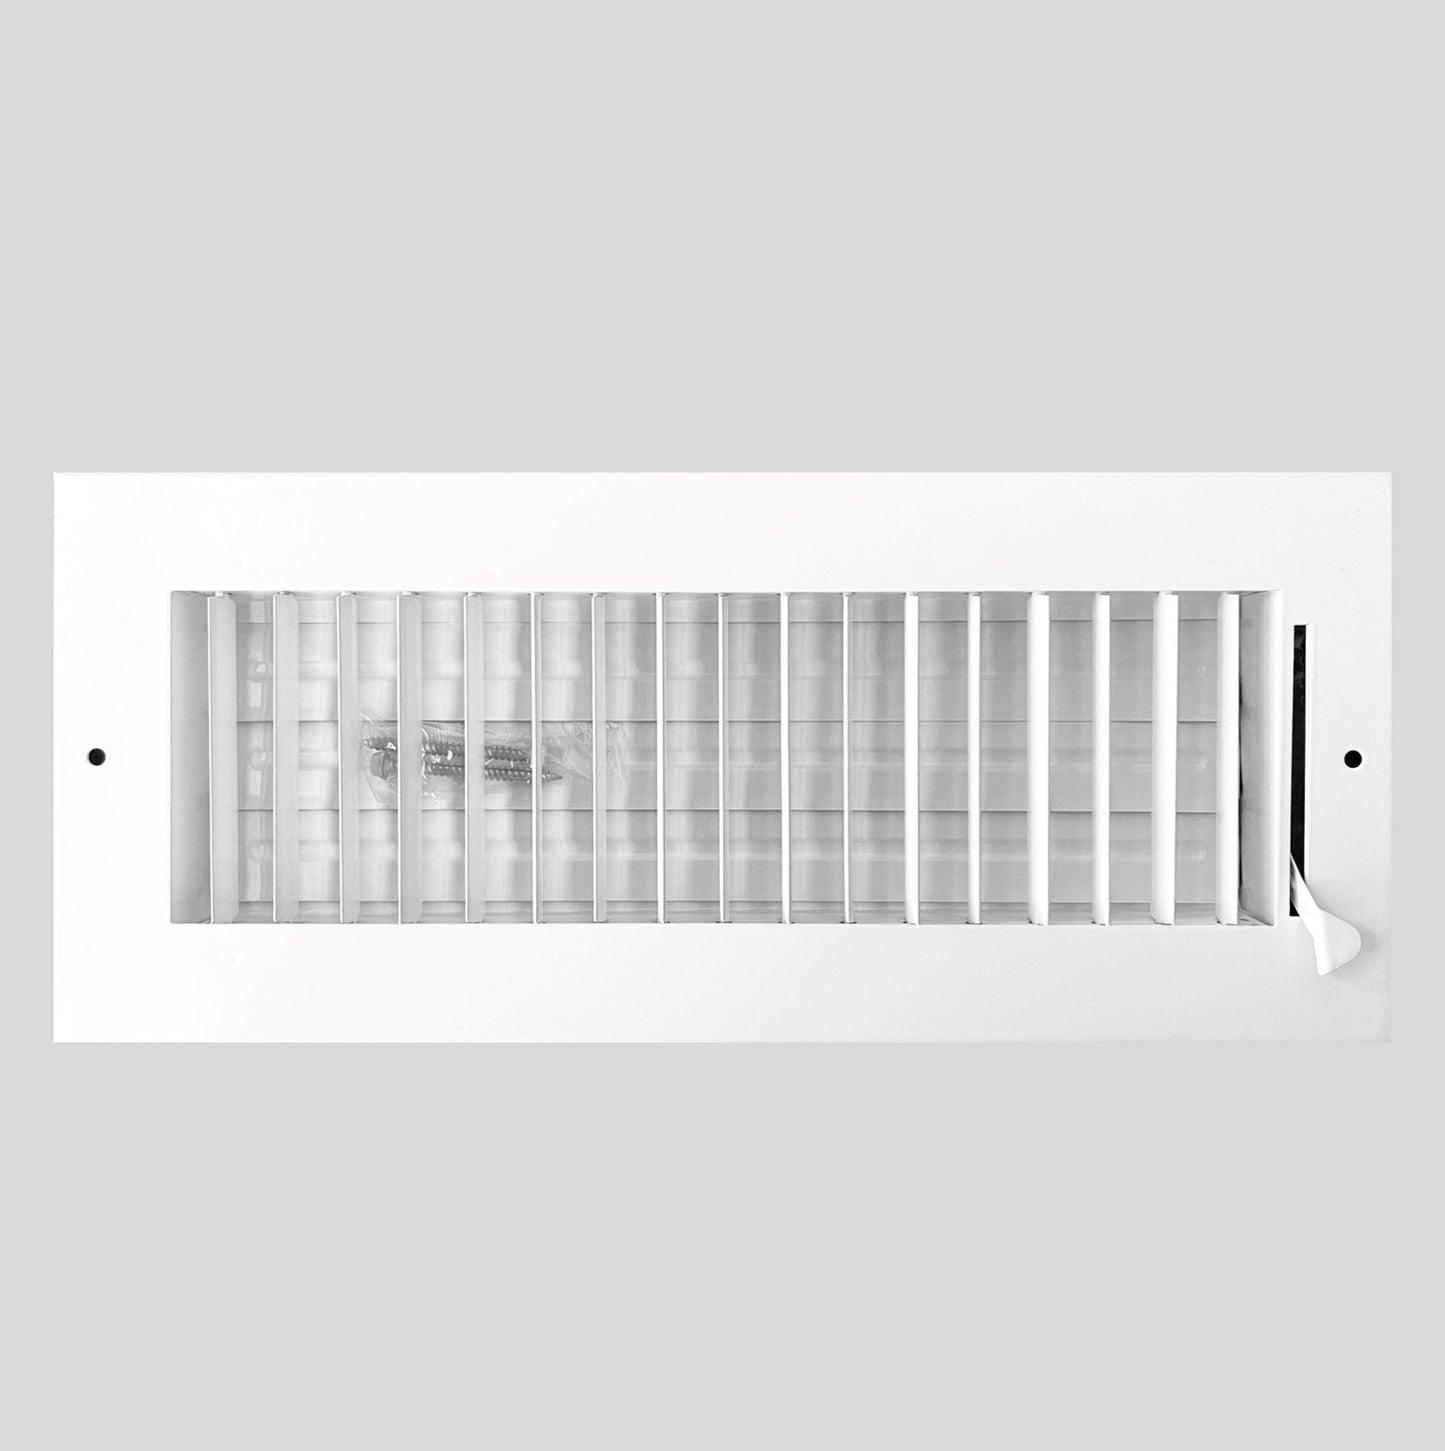 12" x 4" Adjustable Blade Sidewall Ceiling Register Vent Cover Diffuser Heavy Duty Stamped Steel (Listed Size is for Duct Opening or Inside Measurement)